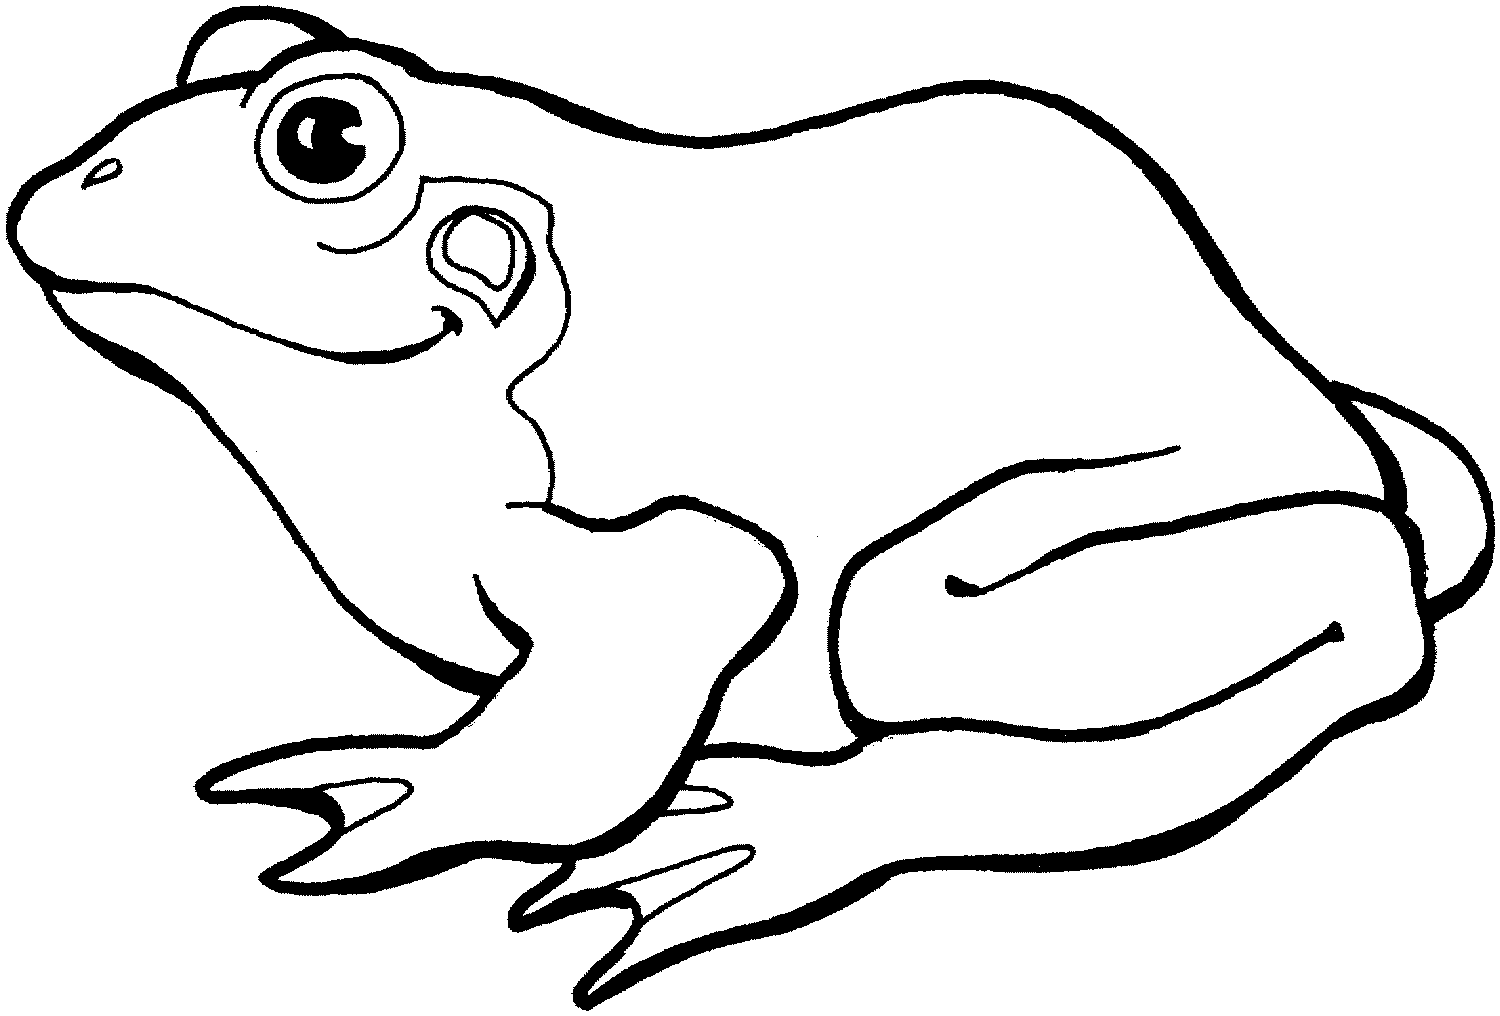 Frog Coloring Pages   Clipart Panda   Free Clipart Images